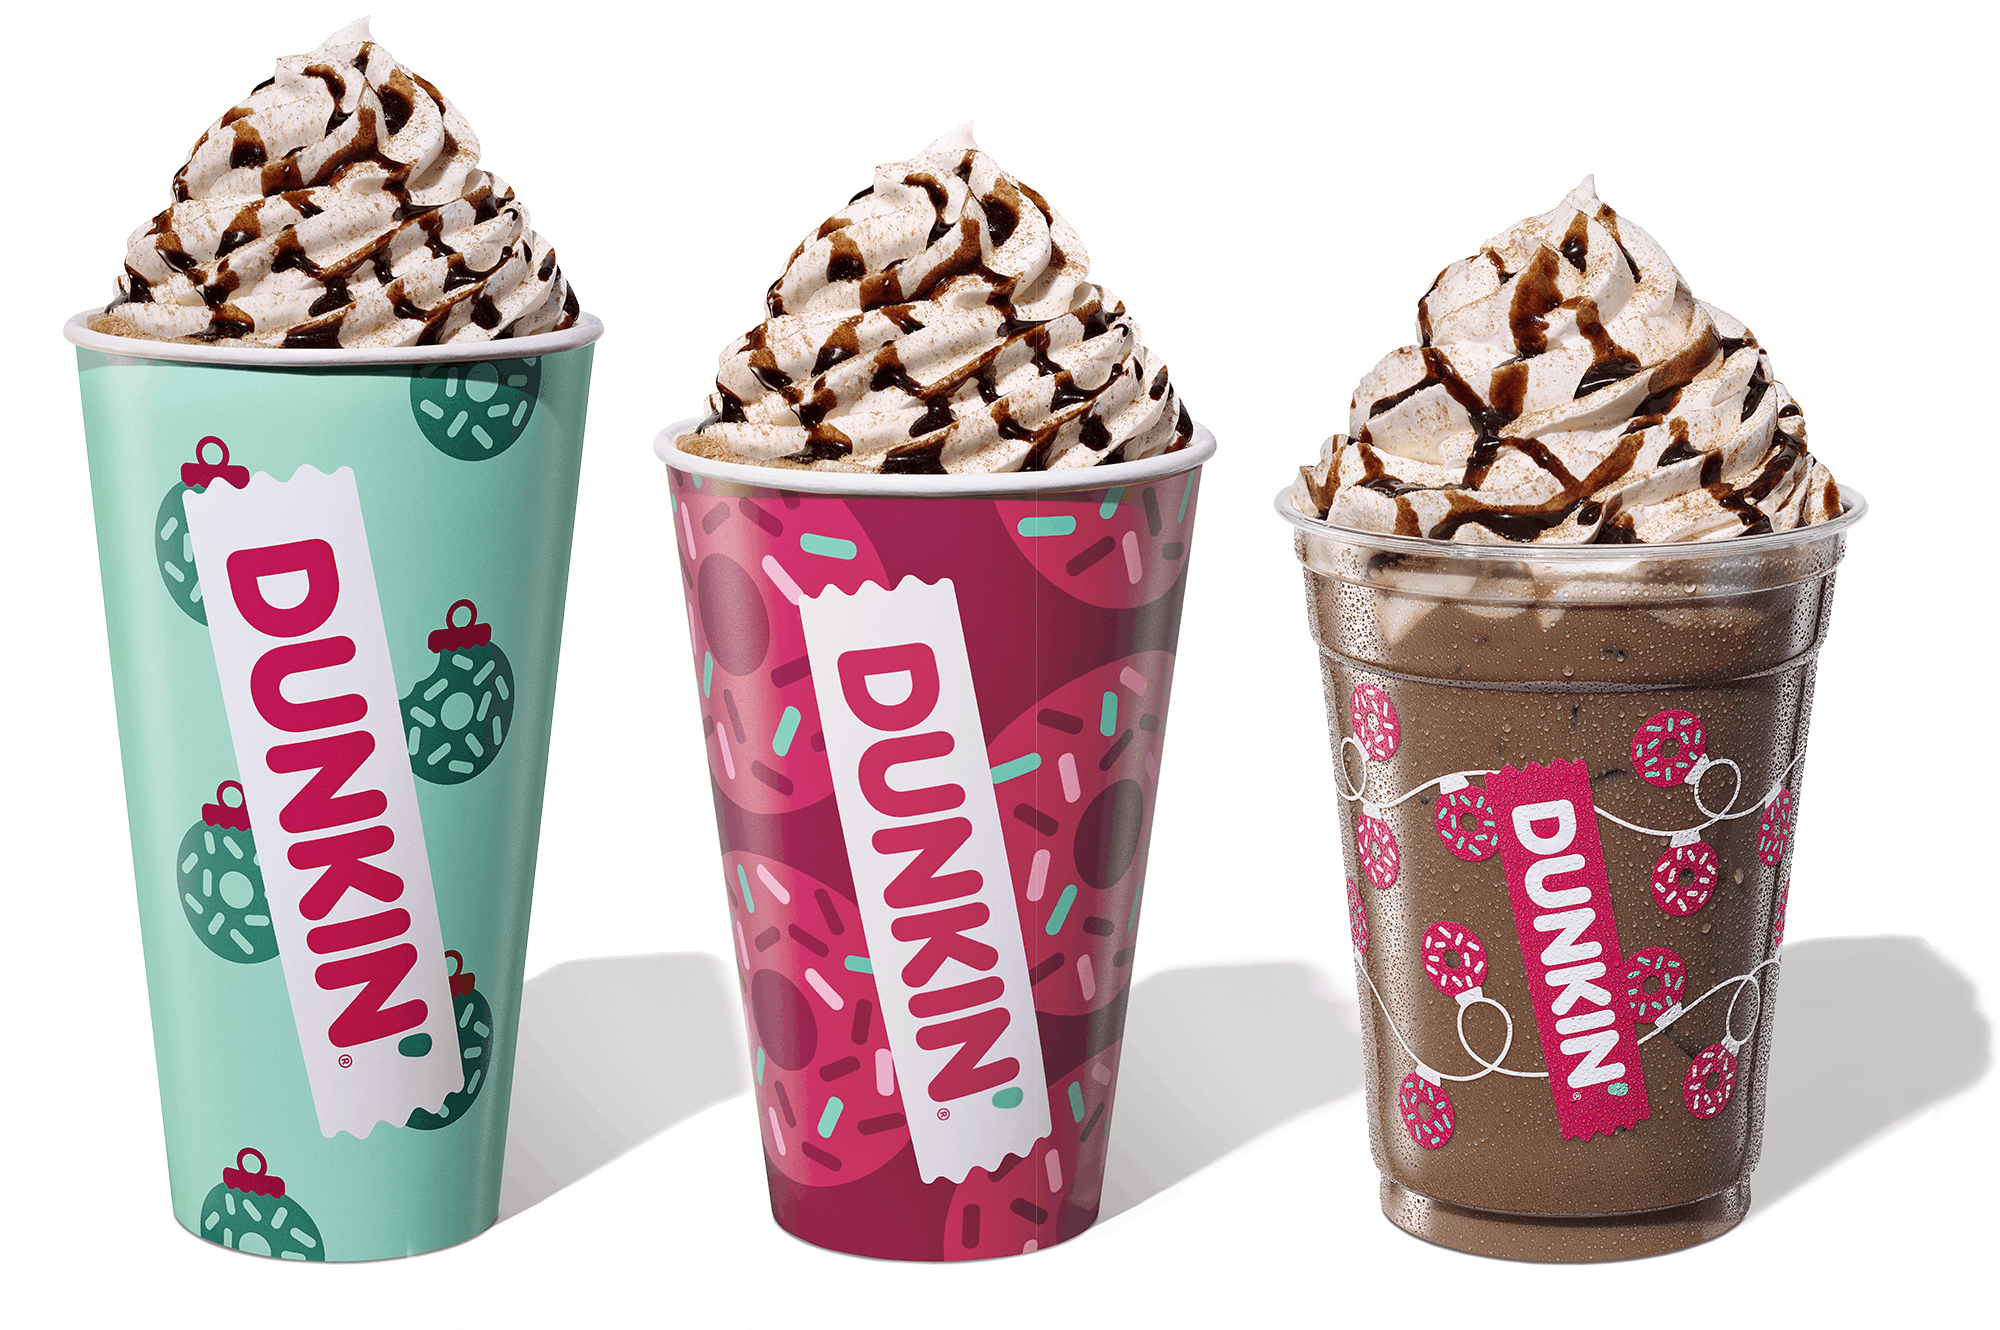 Three version of the Peppermin Mocha signature drink Dunkin Donuts